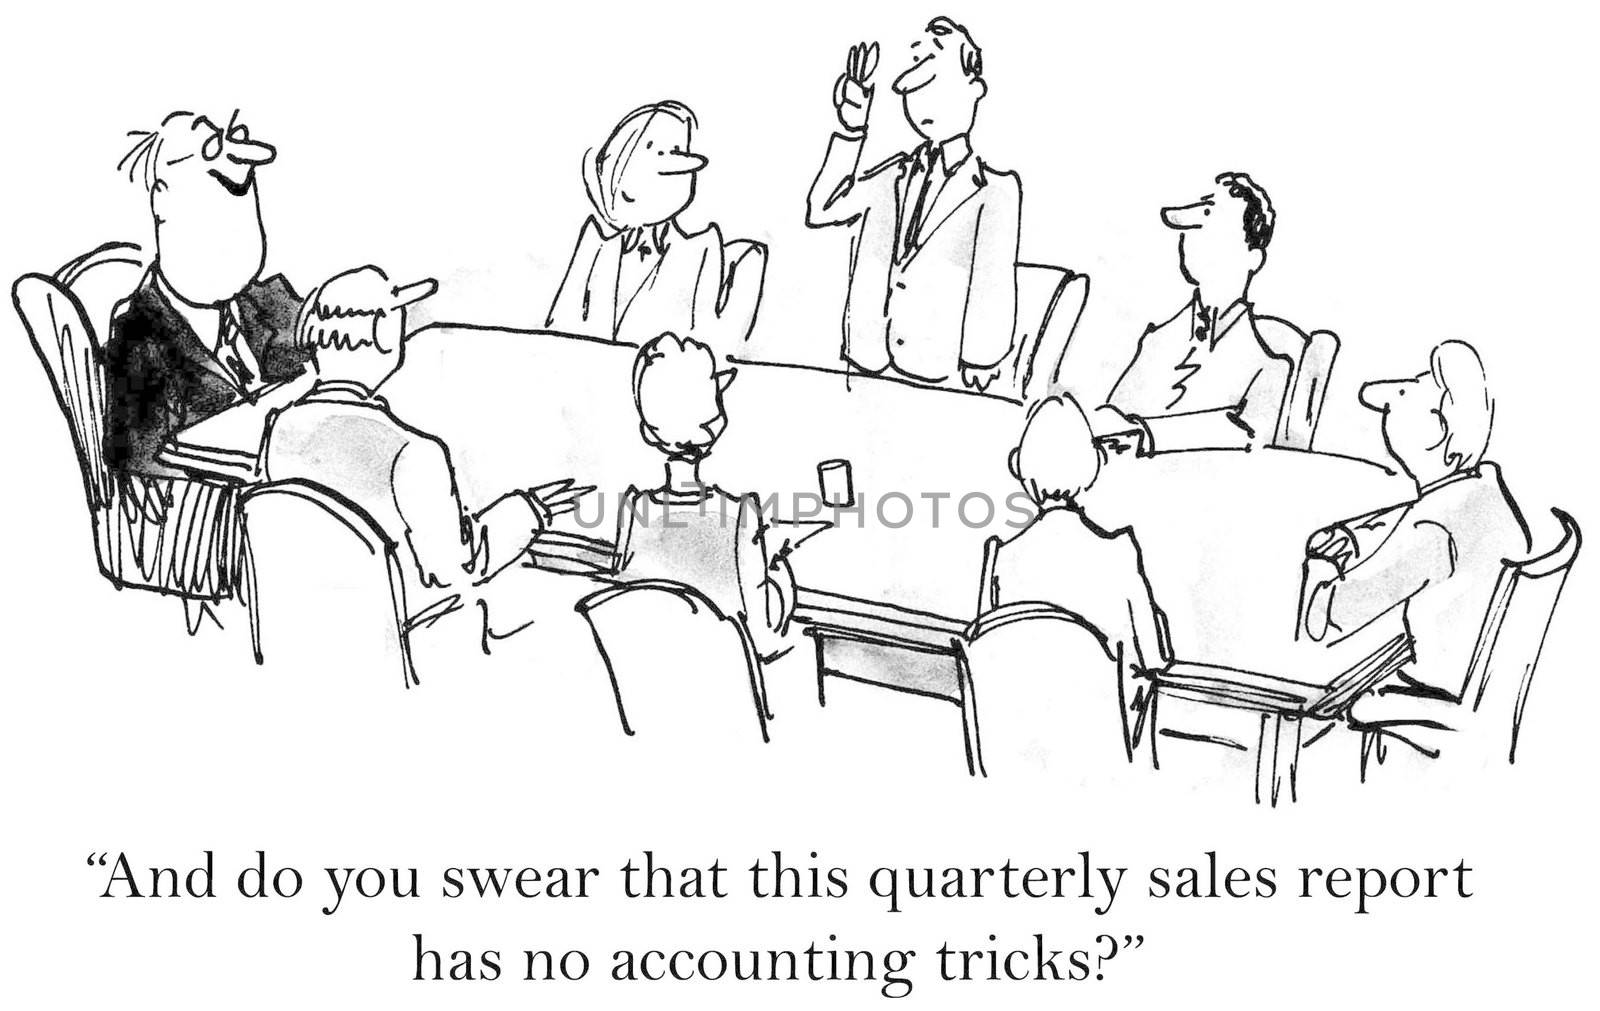 Accounting Tricks by andrewgenn